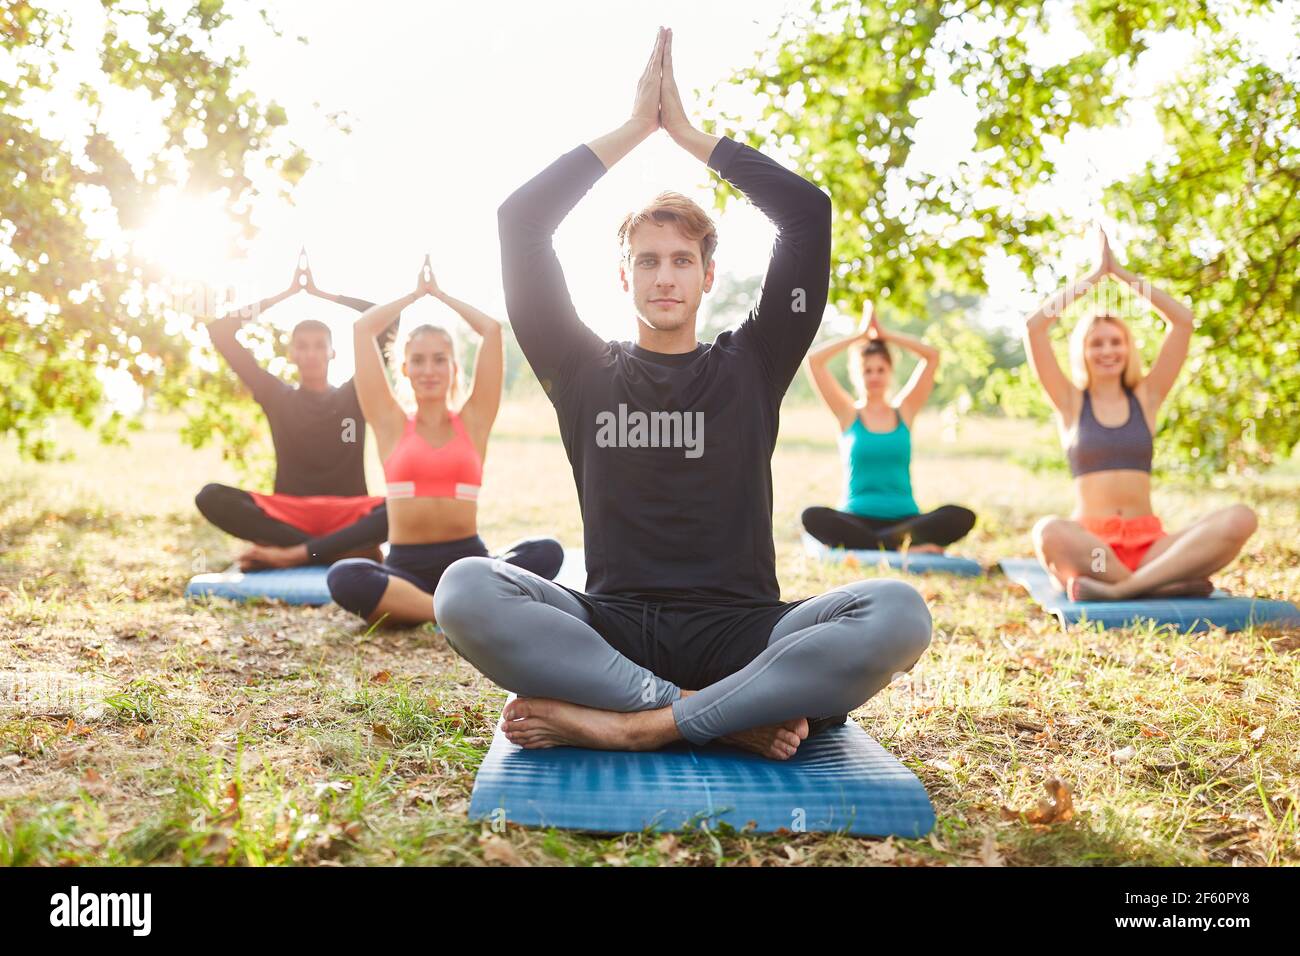 Group of friends doing a yoga meditation for balance and inner peace in nature Stock Photo